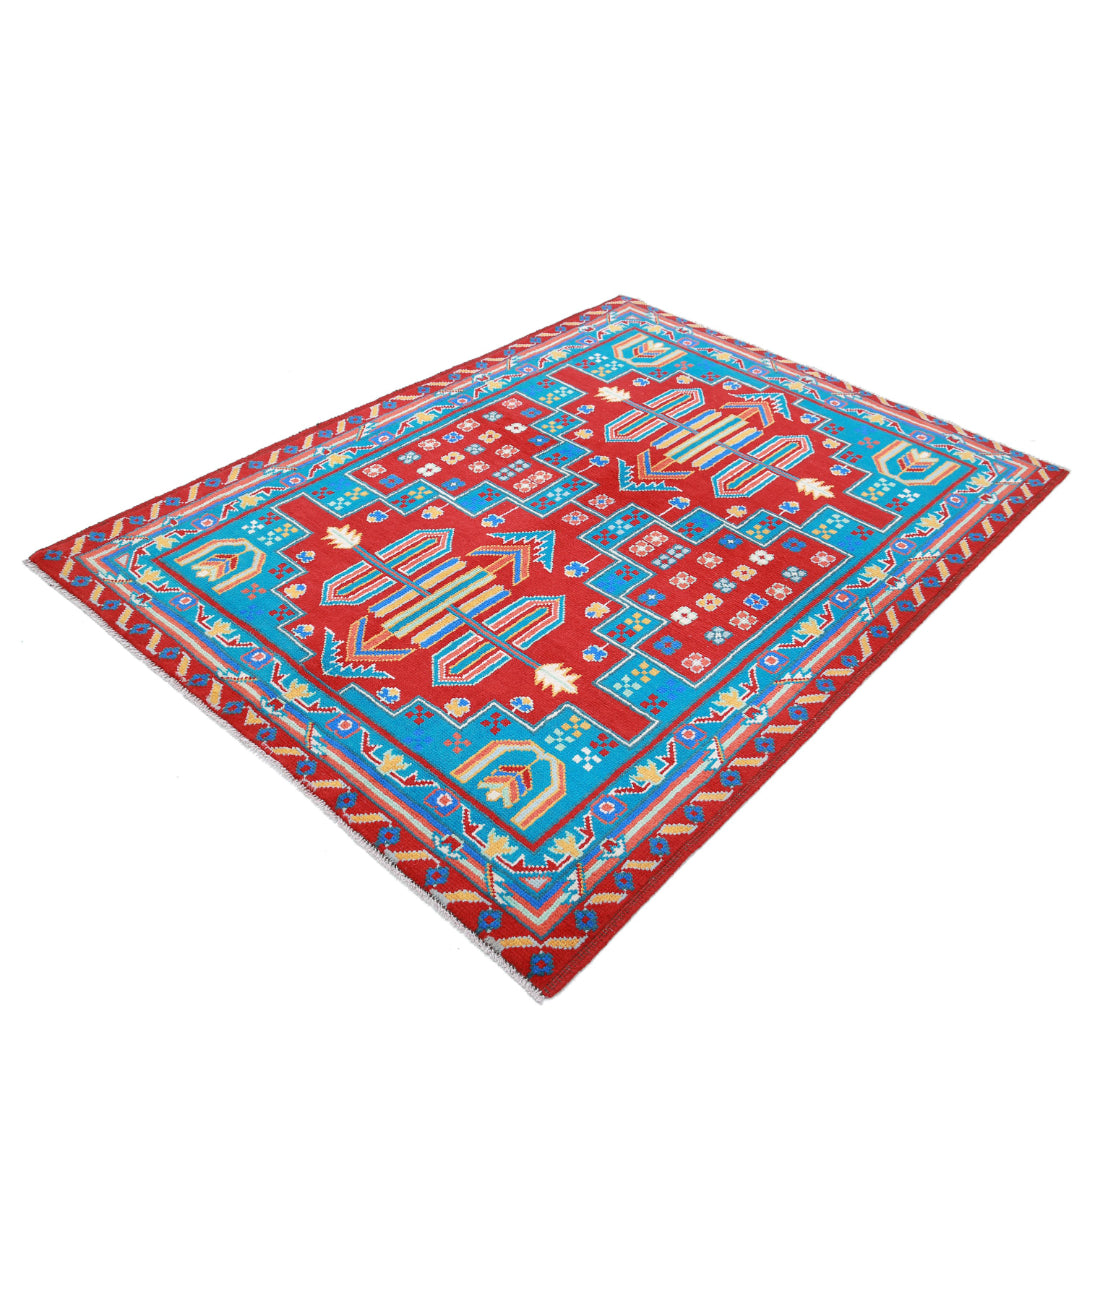 Revival 5'0'' X 6'9'' Hand-Knotted Wool Rug 5'0'' x 6'9'' (150 X 203) / Red / Blue